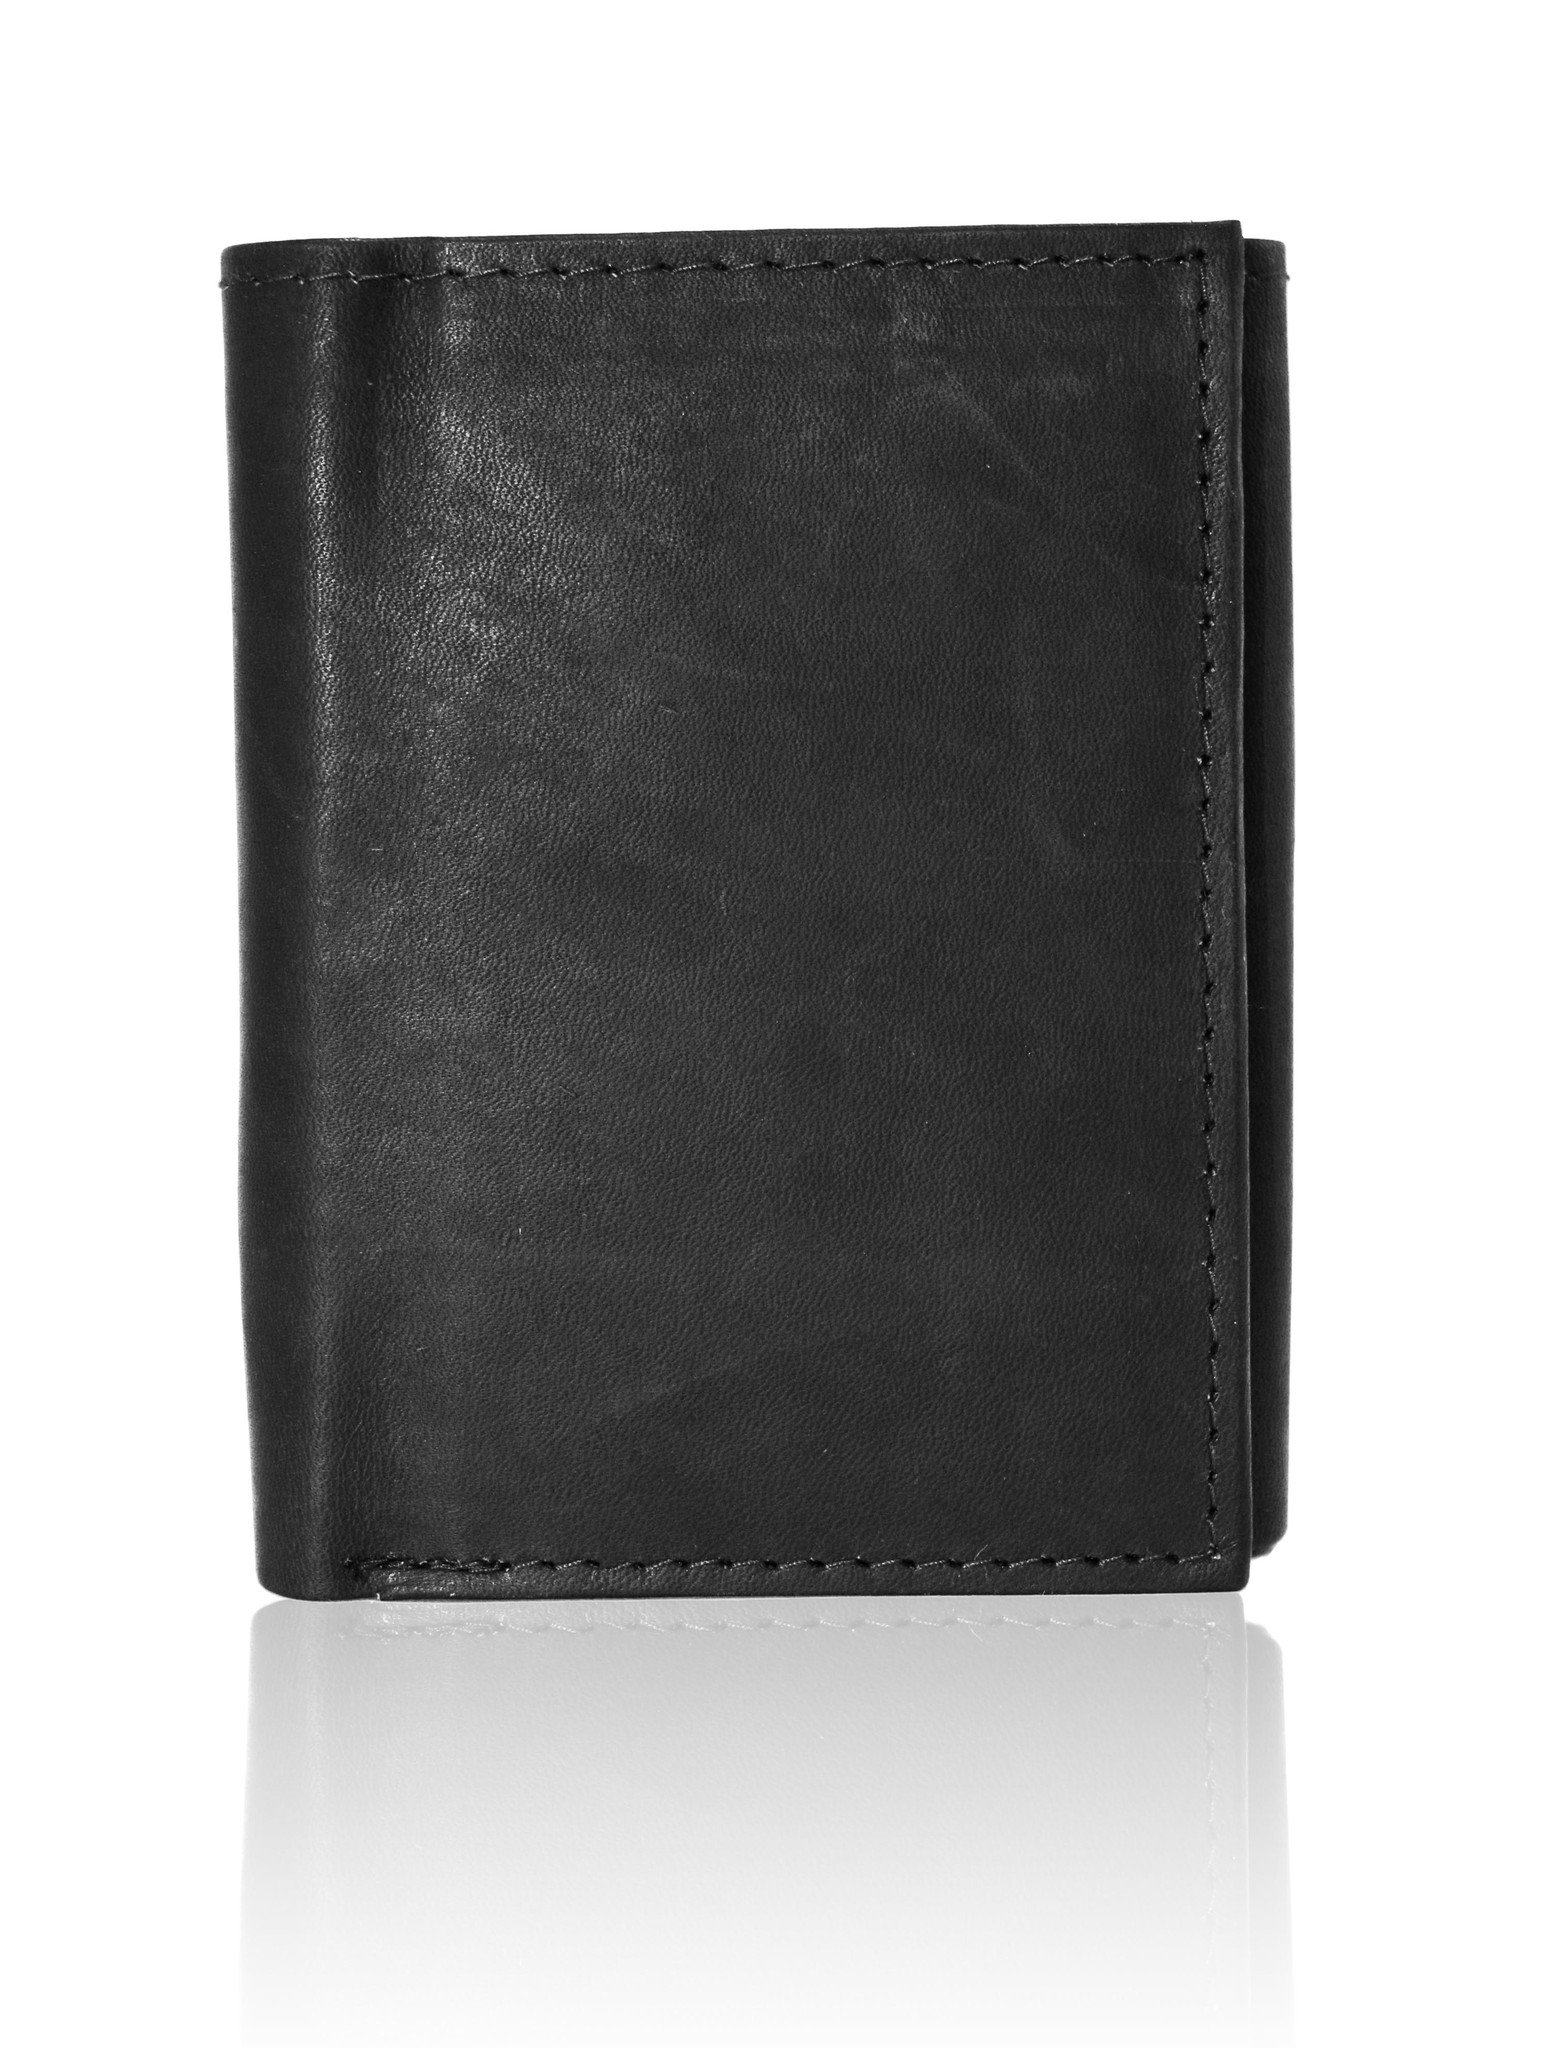 Deluxe Genuine Leather Tri-fold Wallet For Men - Brown